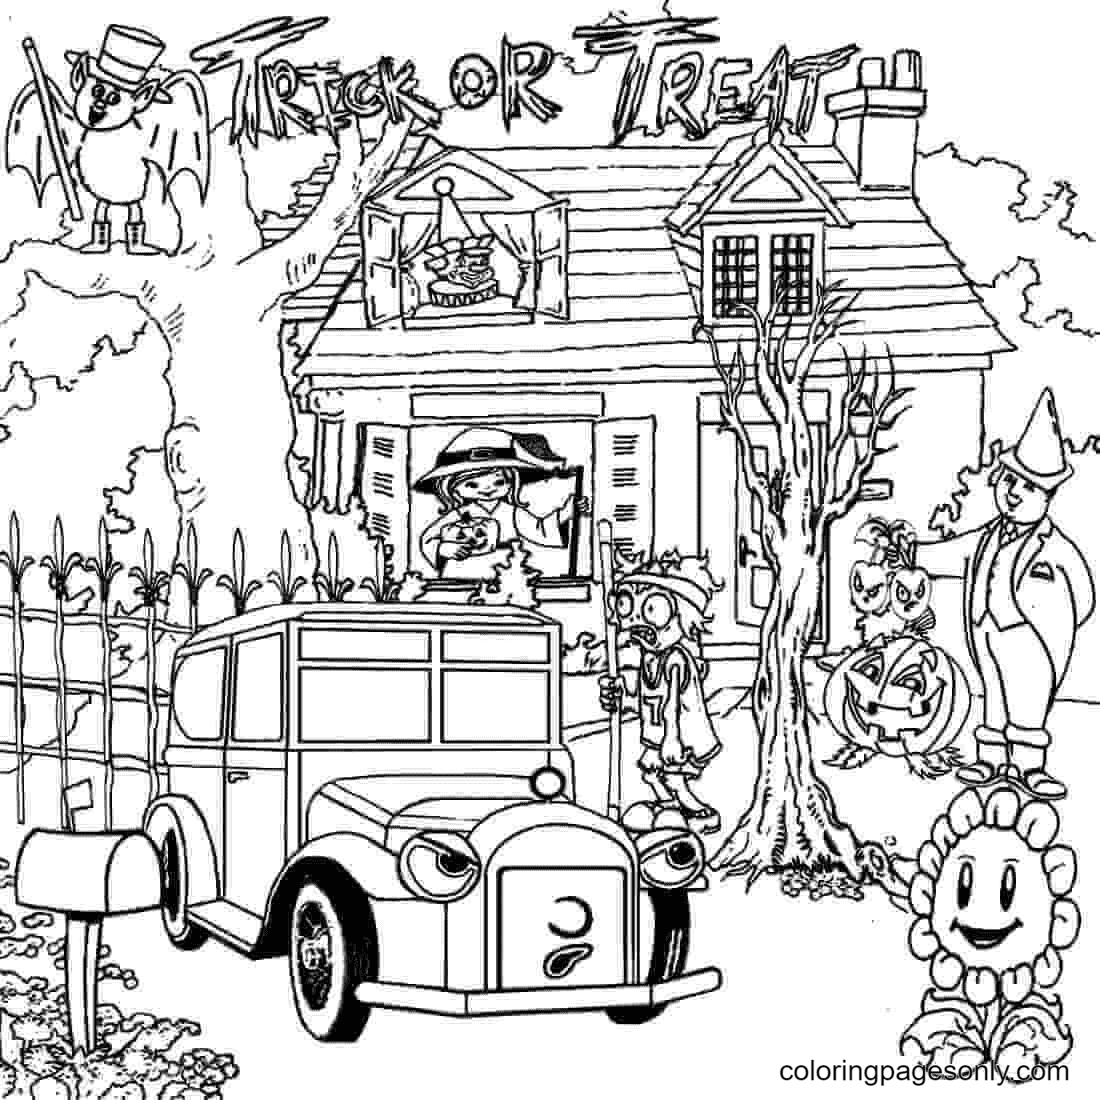 Trick Or Treat Haunted House Coloring Pages